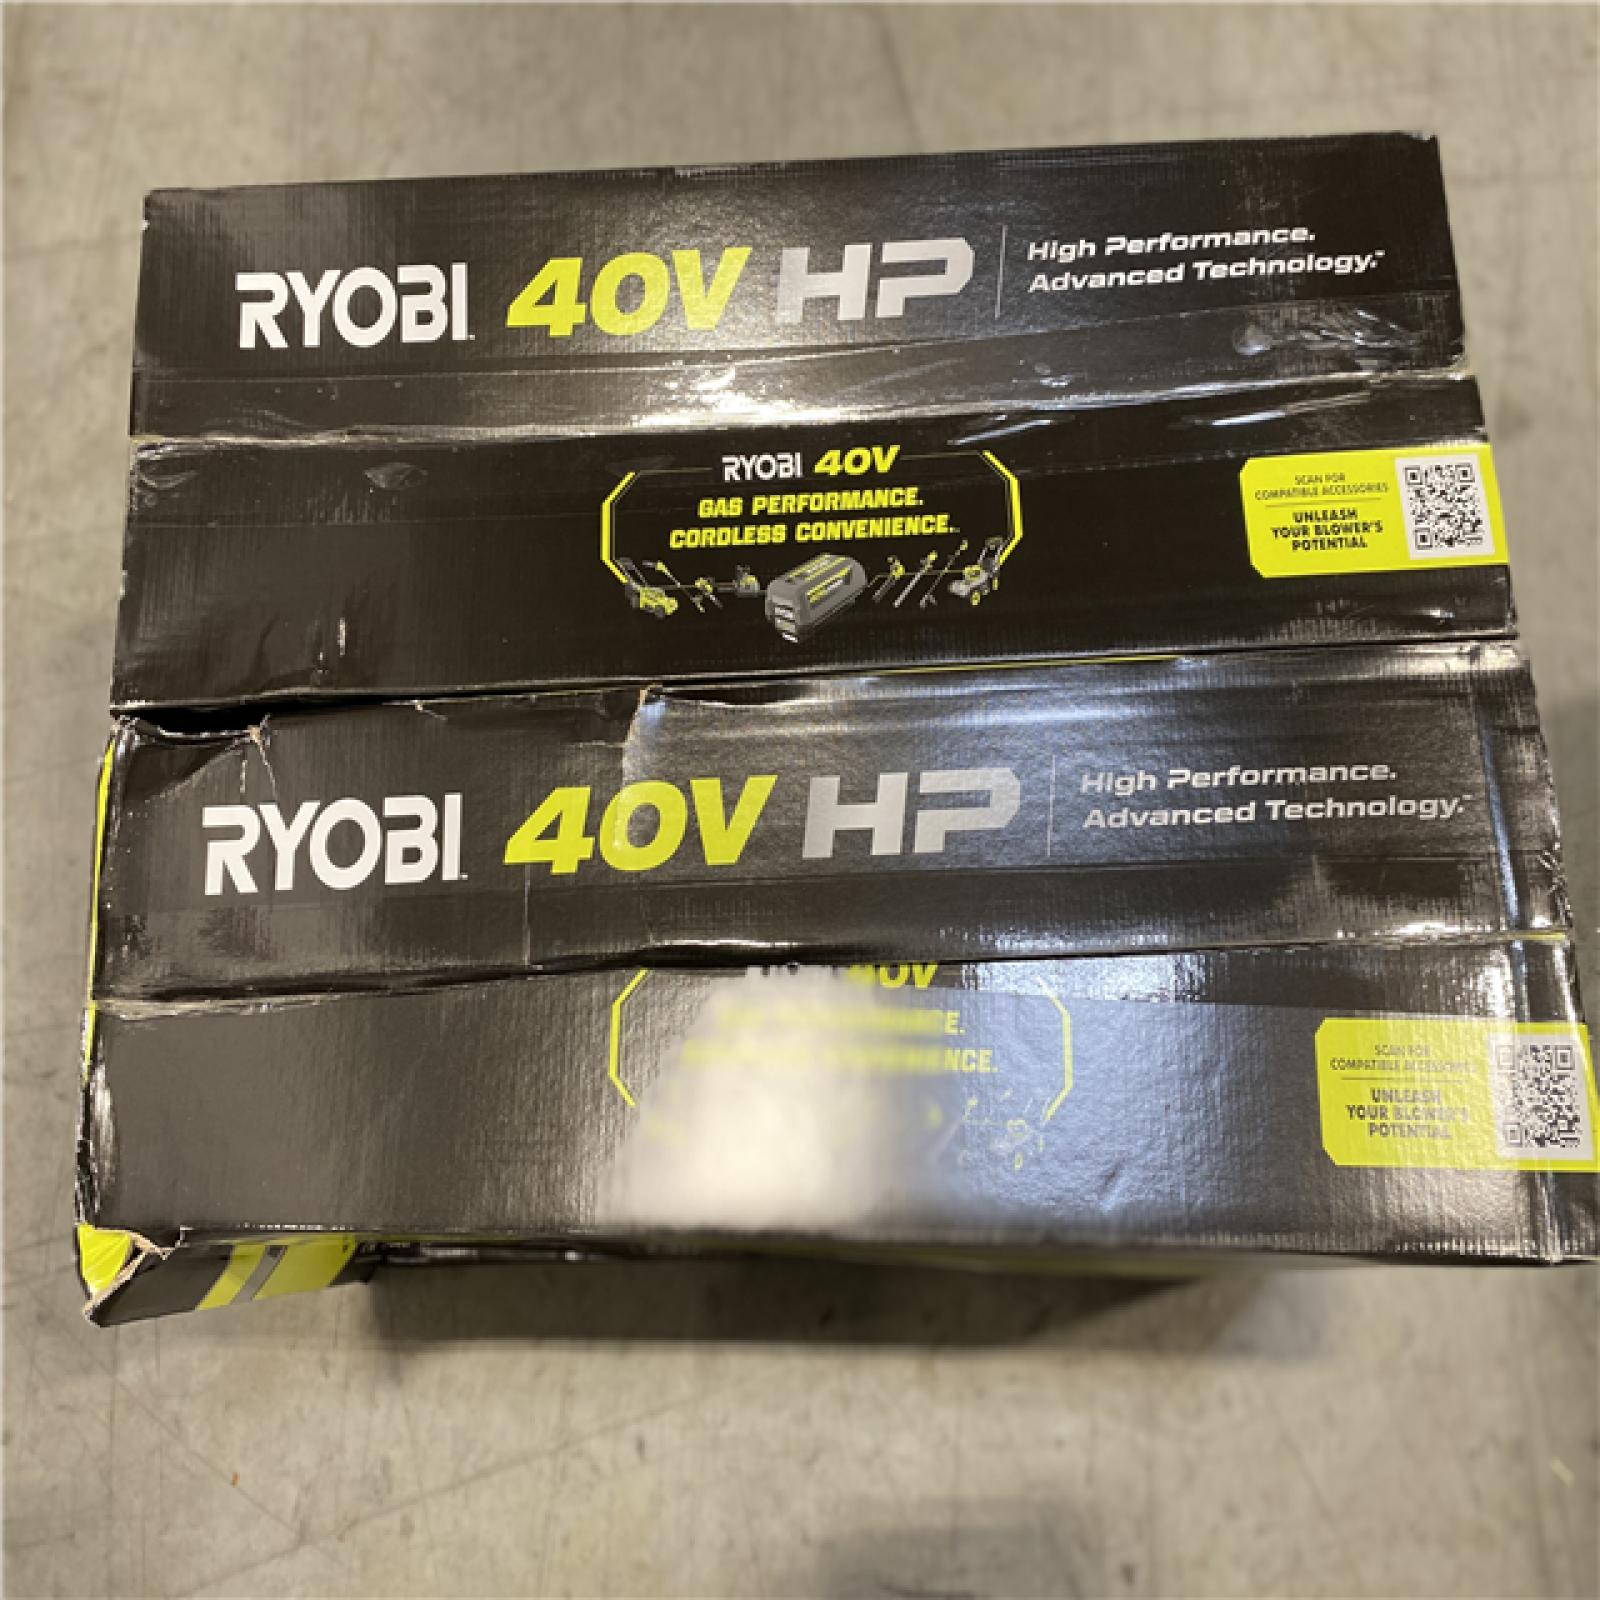 DALLAS LOCATION - New  (2 UNITS)RYOBI 40V HP Brushless Whisper Series 190 MPH 730 CFM Cordless Battery Jet Fan Leaf Blower with (2) 4.0 Ah Batteries & Charger